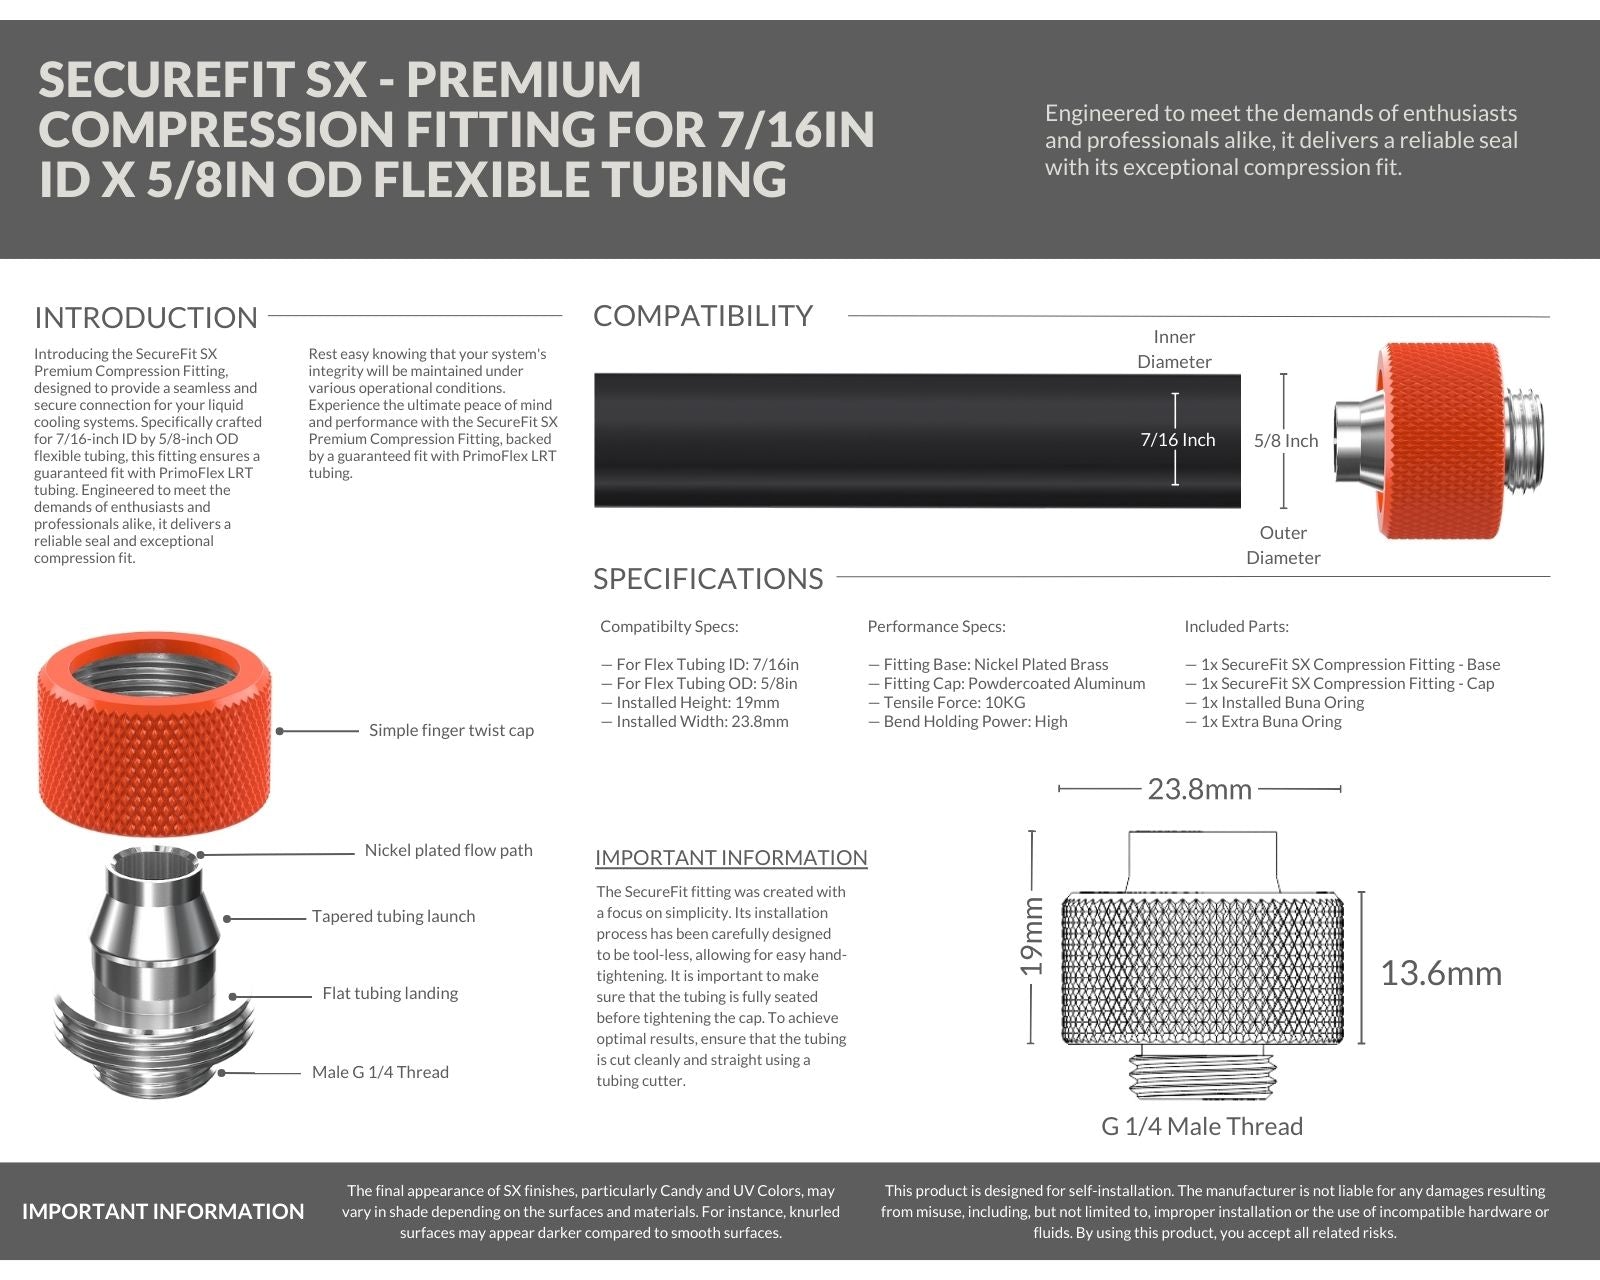 PrimoChill SecureFit SX - Premium Compression Fitting For 7/16in ID x 5/8in OD Flexible Tubing (F-SFSX758) - Available in 20+ Colors, Custom Watercooling Loop Ready - UV Orange